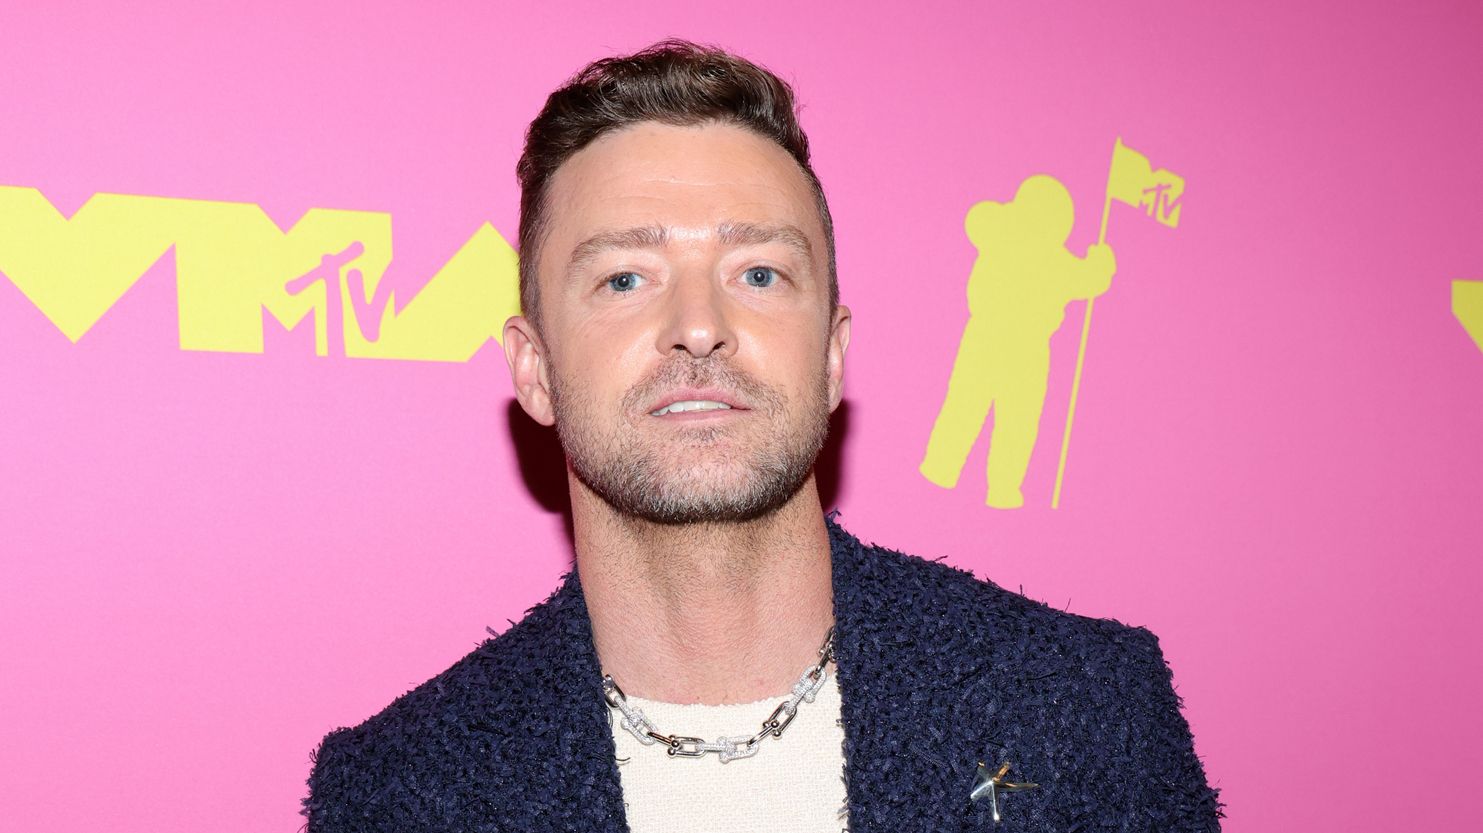 Breaking News: Pop Star Justin Timberlake Arrested – Here’s What Happened